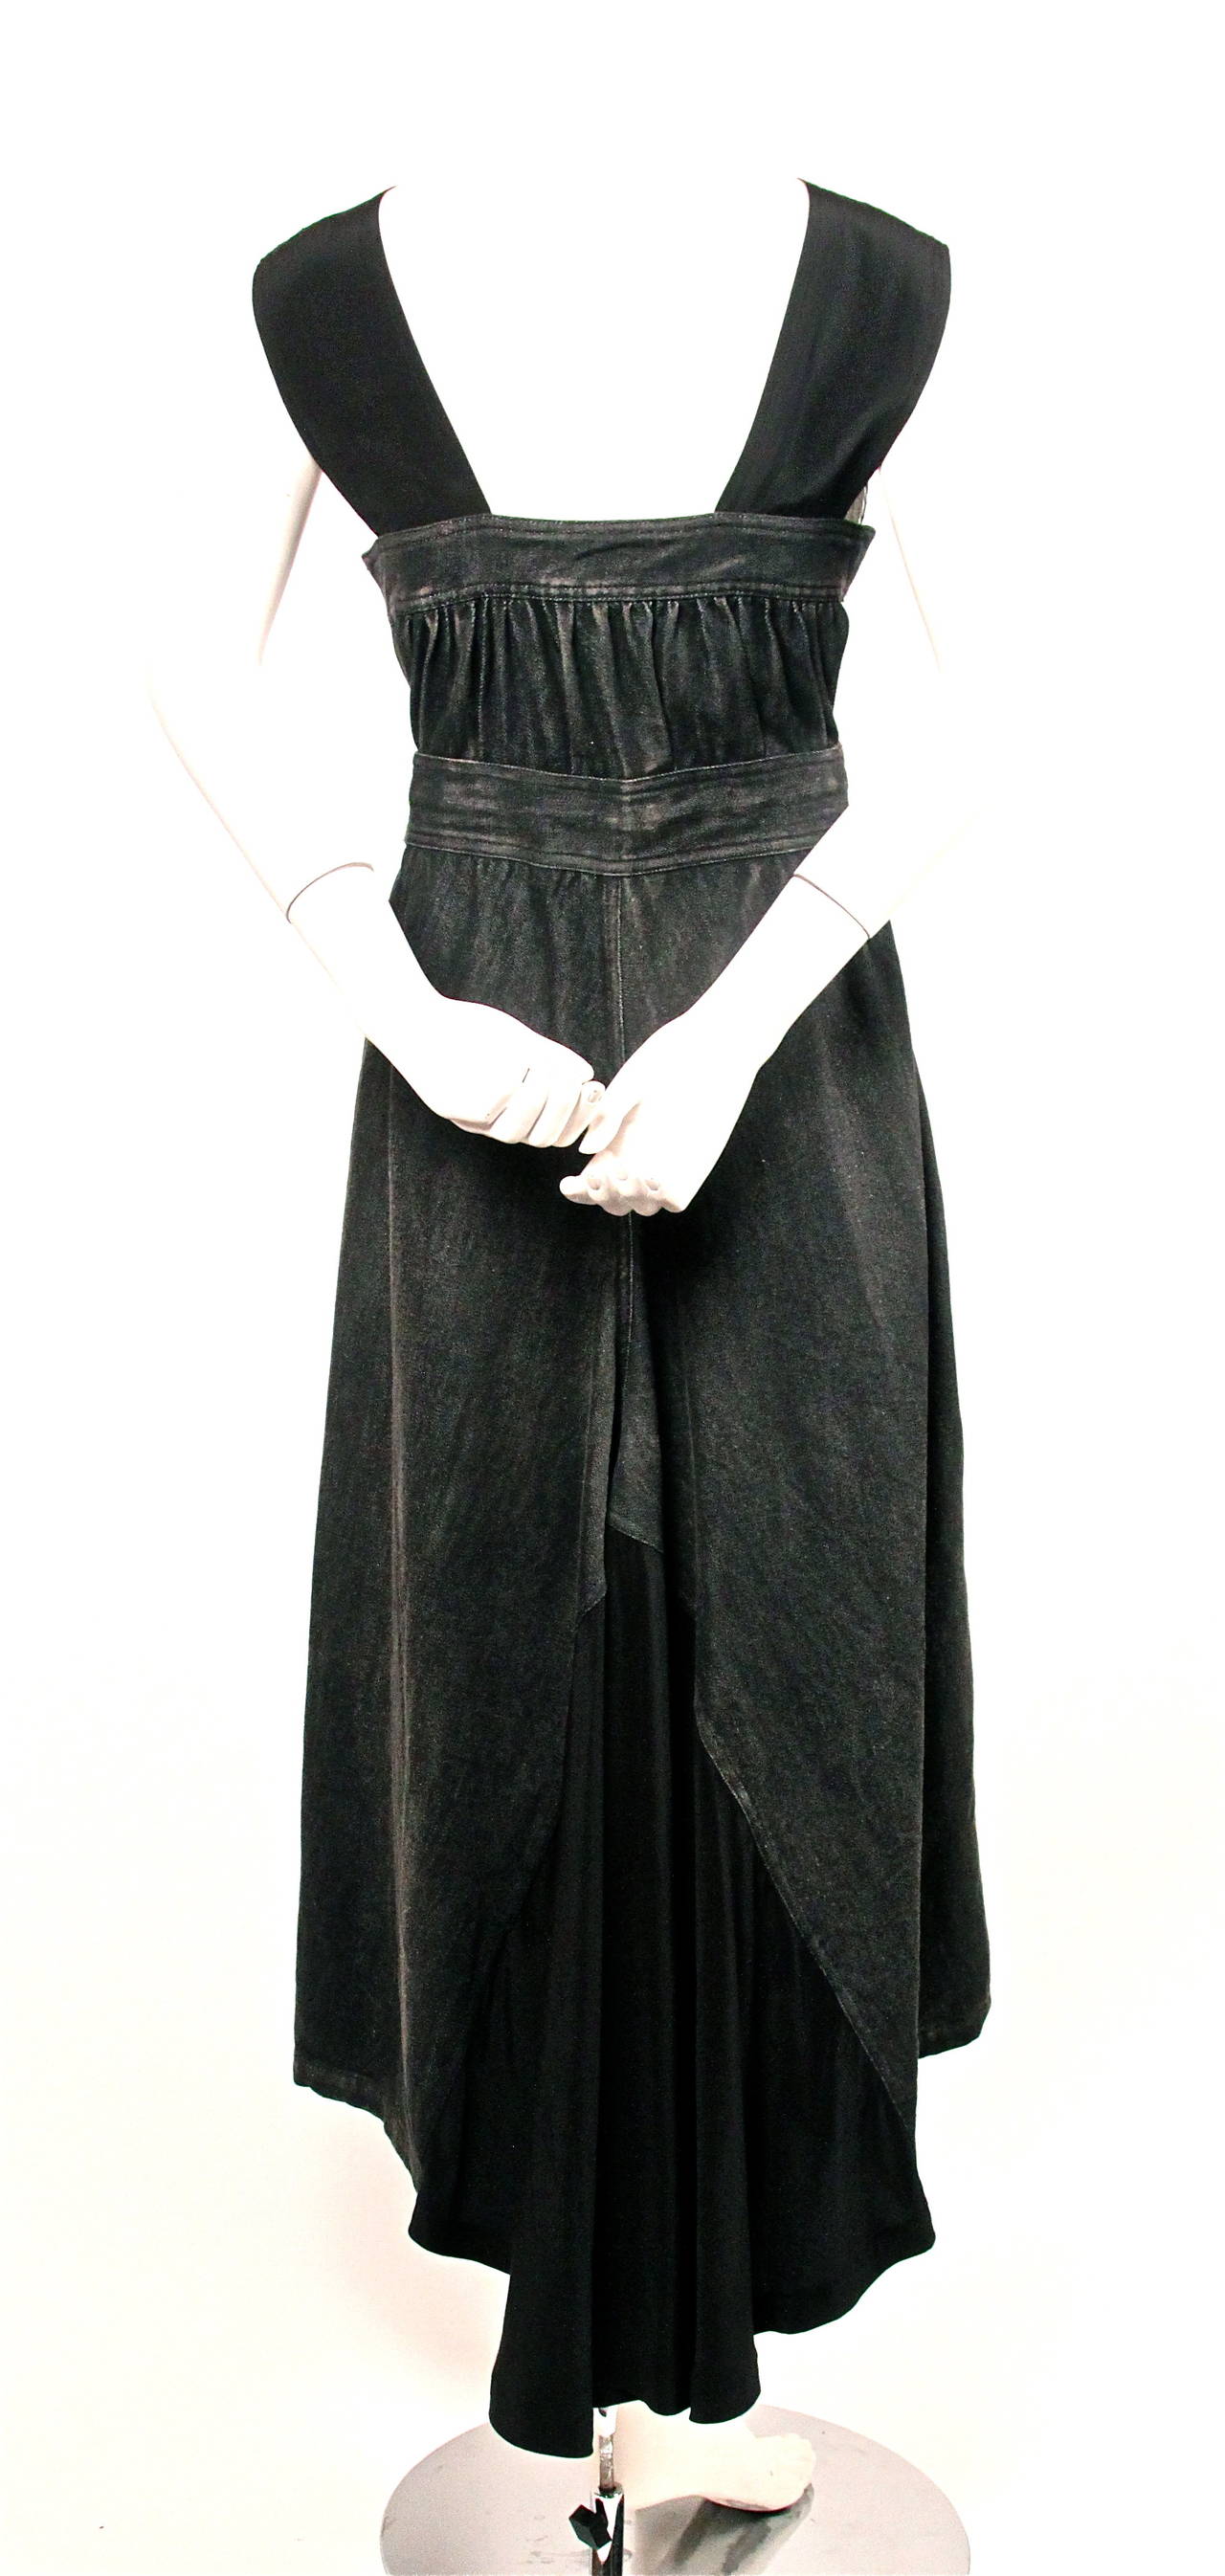 Very dramatic dress from Yohji Yamamoto dating to the early 2000's. Made of black cotton denim with silk /cashmere inserts. Dress can be worn a number of ways. Zips up center front with adjustable button closure at waist. Patch pockets at hips.